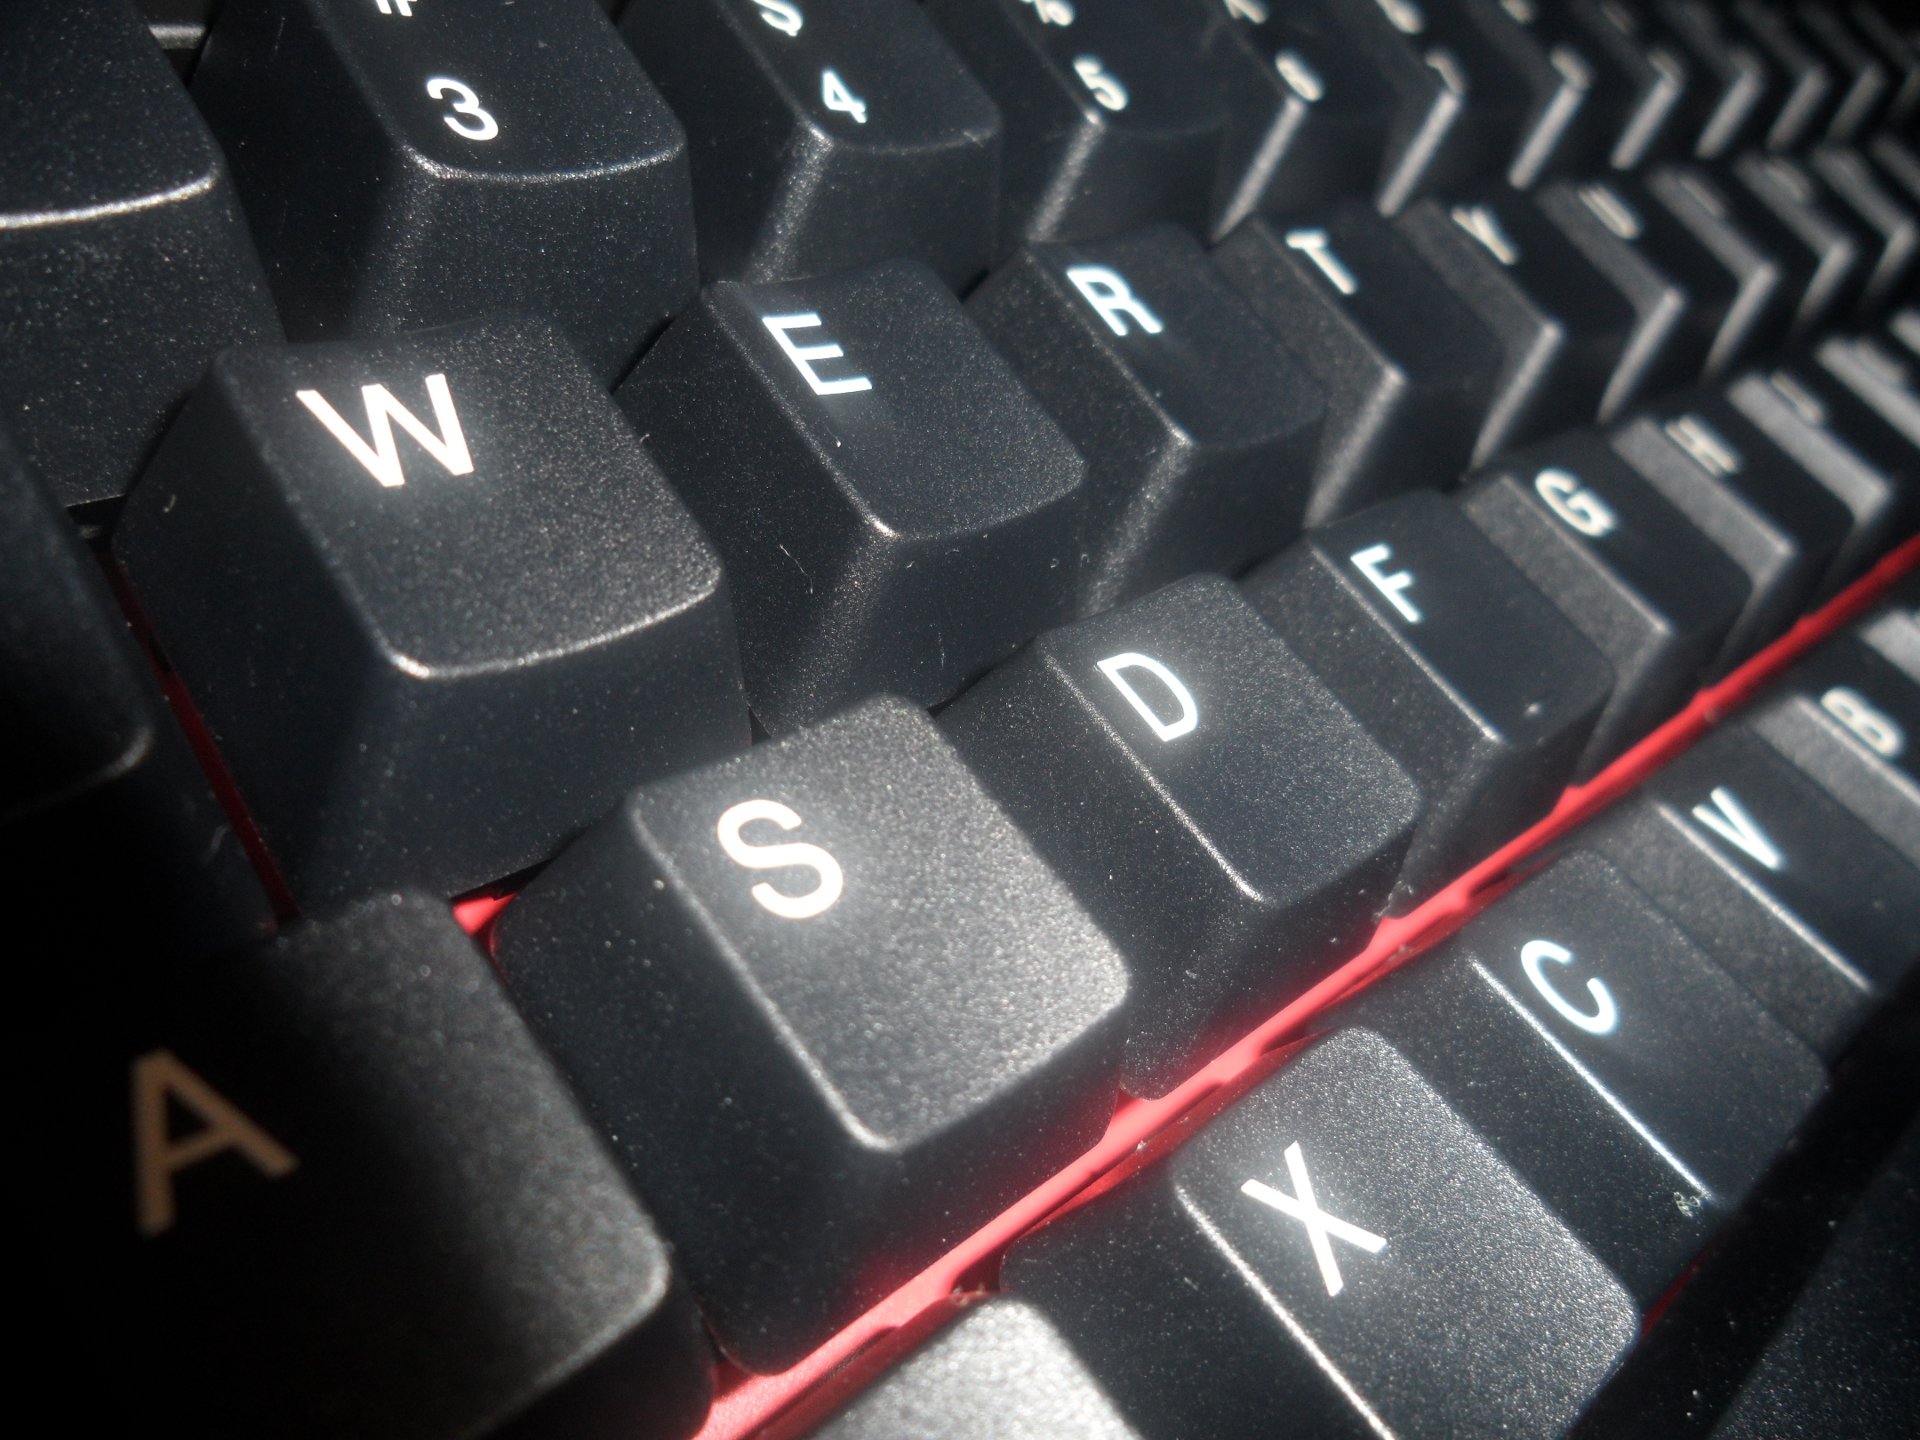 Download hd 1920x1440 Keyboard computer background ID:497911 for free